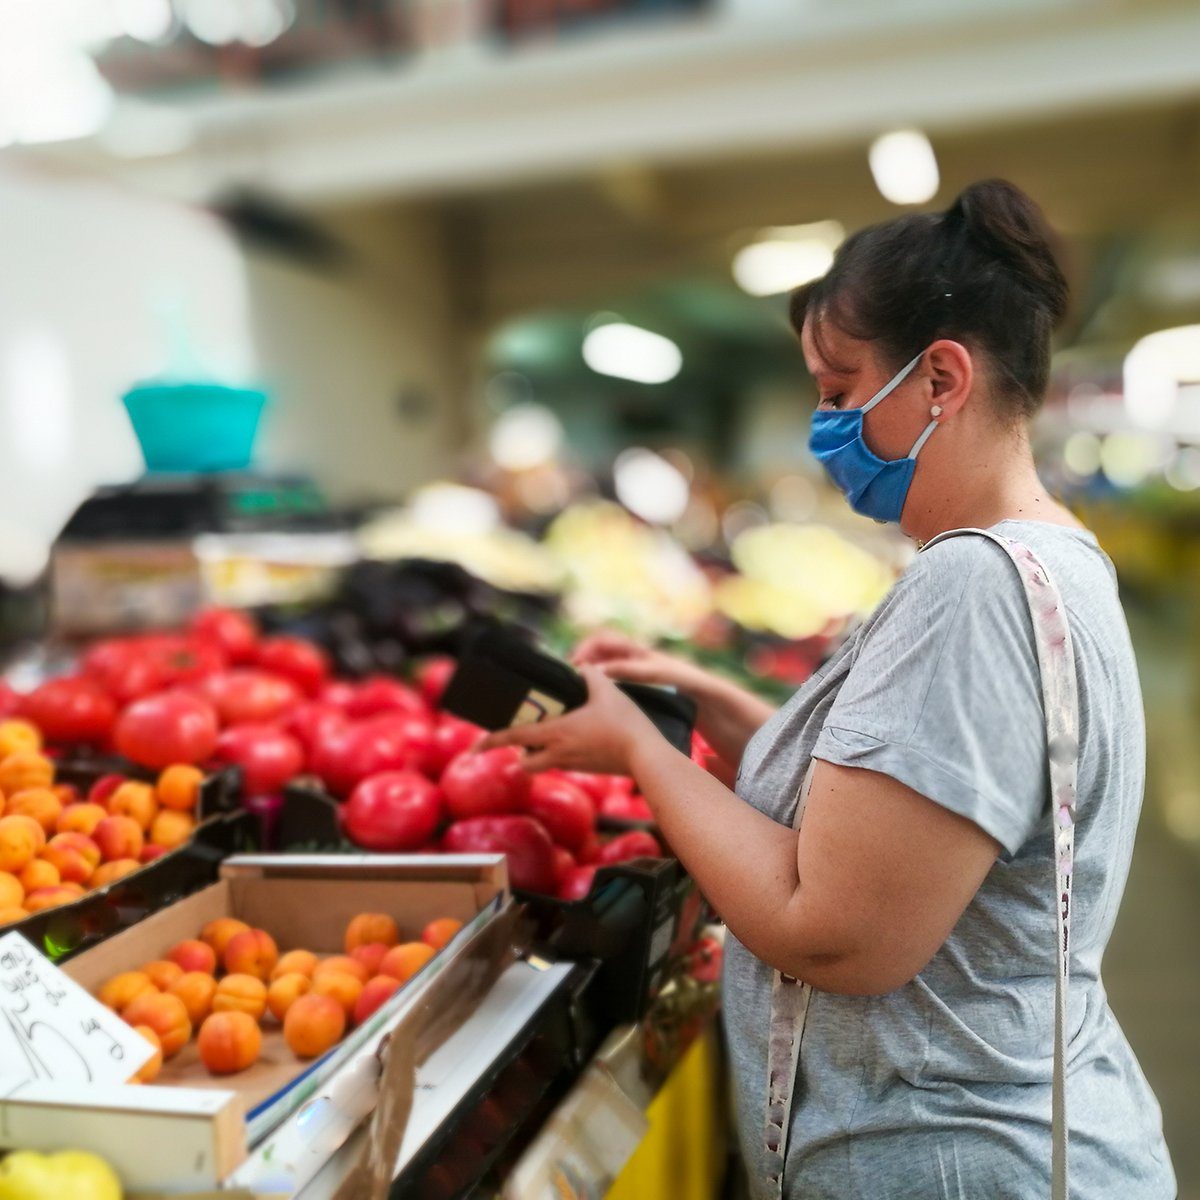 Selective focus color image depicting a caucasian woman in her 30s wearing a protective surgical face mask during the coronavirus (Covid-19) pandemic, in a bid to stop the spread of the virus. The woman is pushing shopping for fresh fruit and vegetables in her local market. Room for copy space.